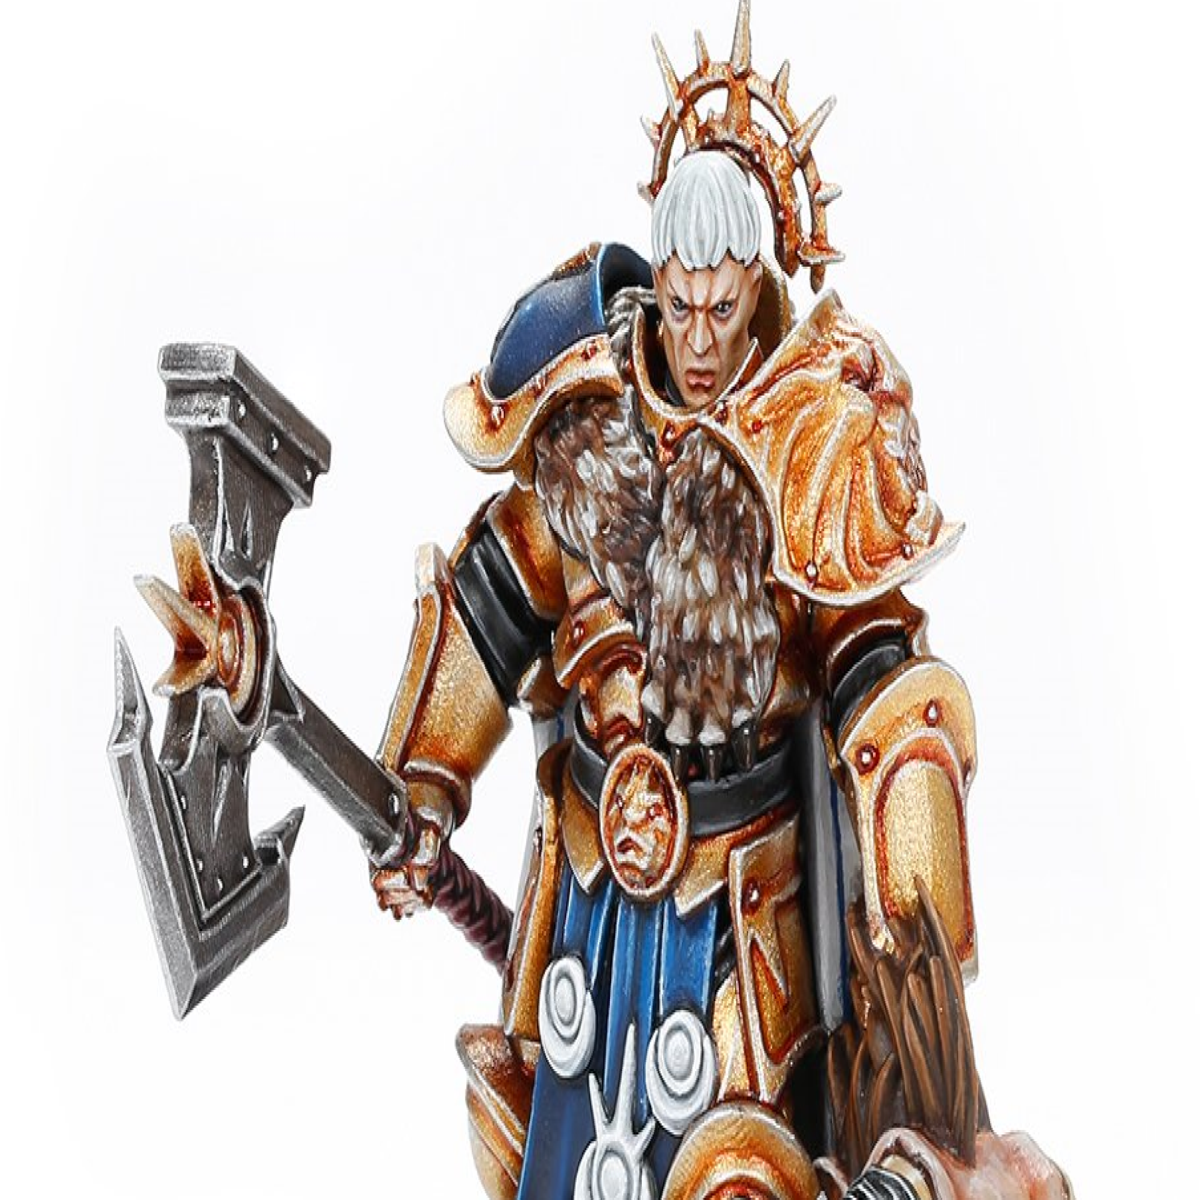 Games Workshop introduces, then appears to erase, Age of Sigmar's 